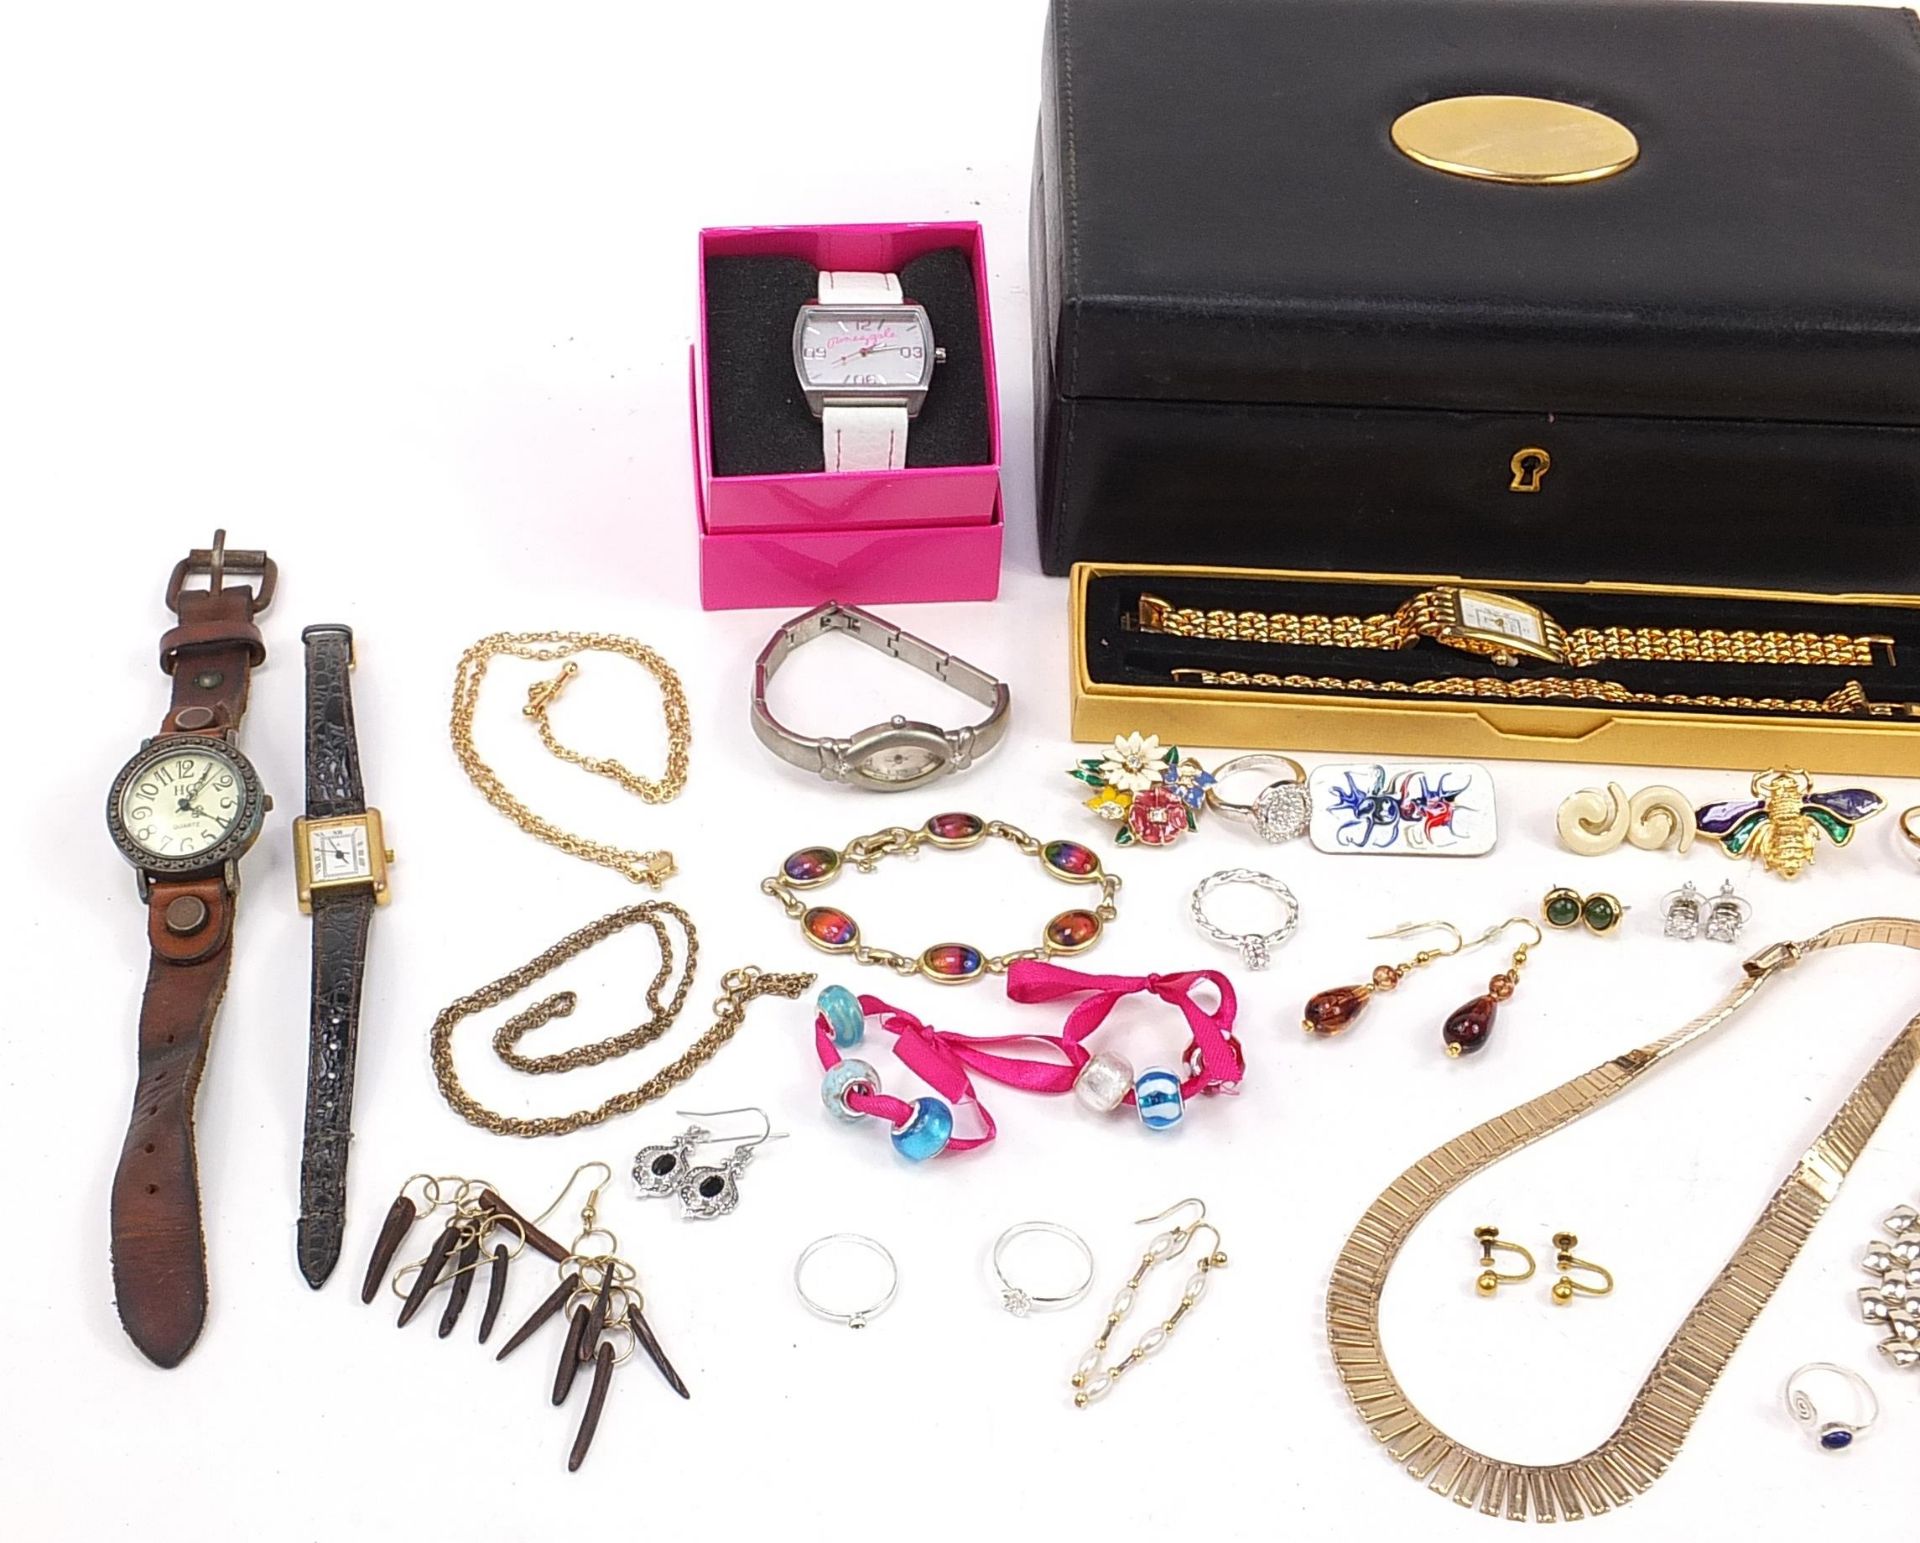 Vintage and later costume jewellery and wristwatches including necklaces, earrings and brooches - Image 2 of 3